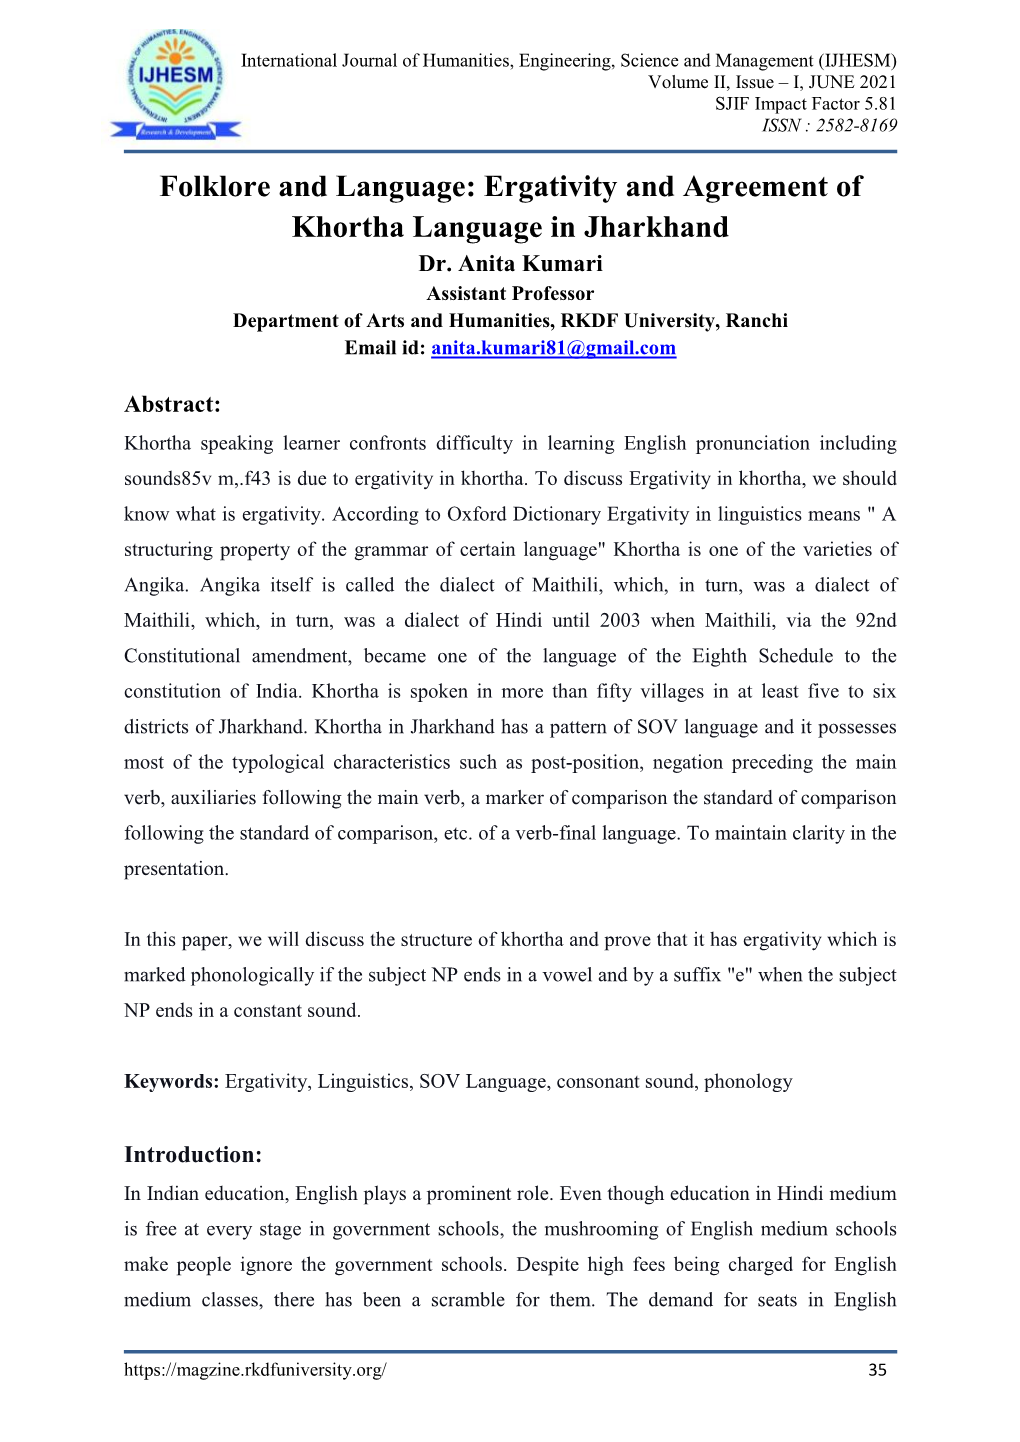 Ergativity and Agreement of Khortha Language in Jharkhand Dr